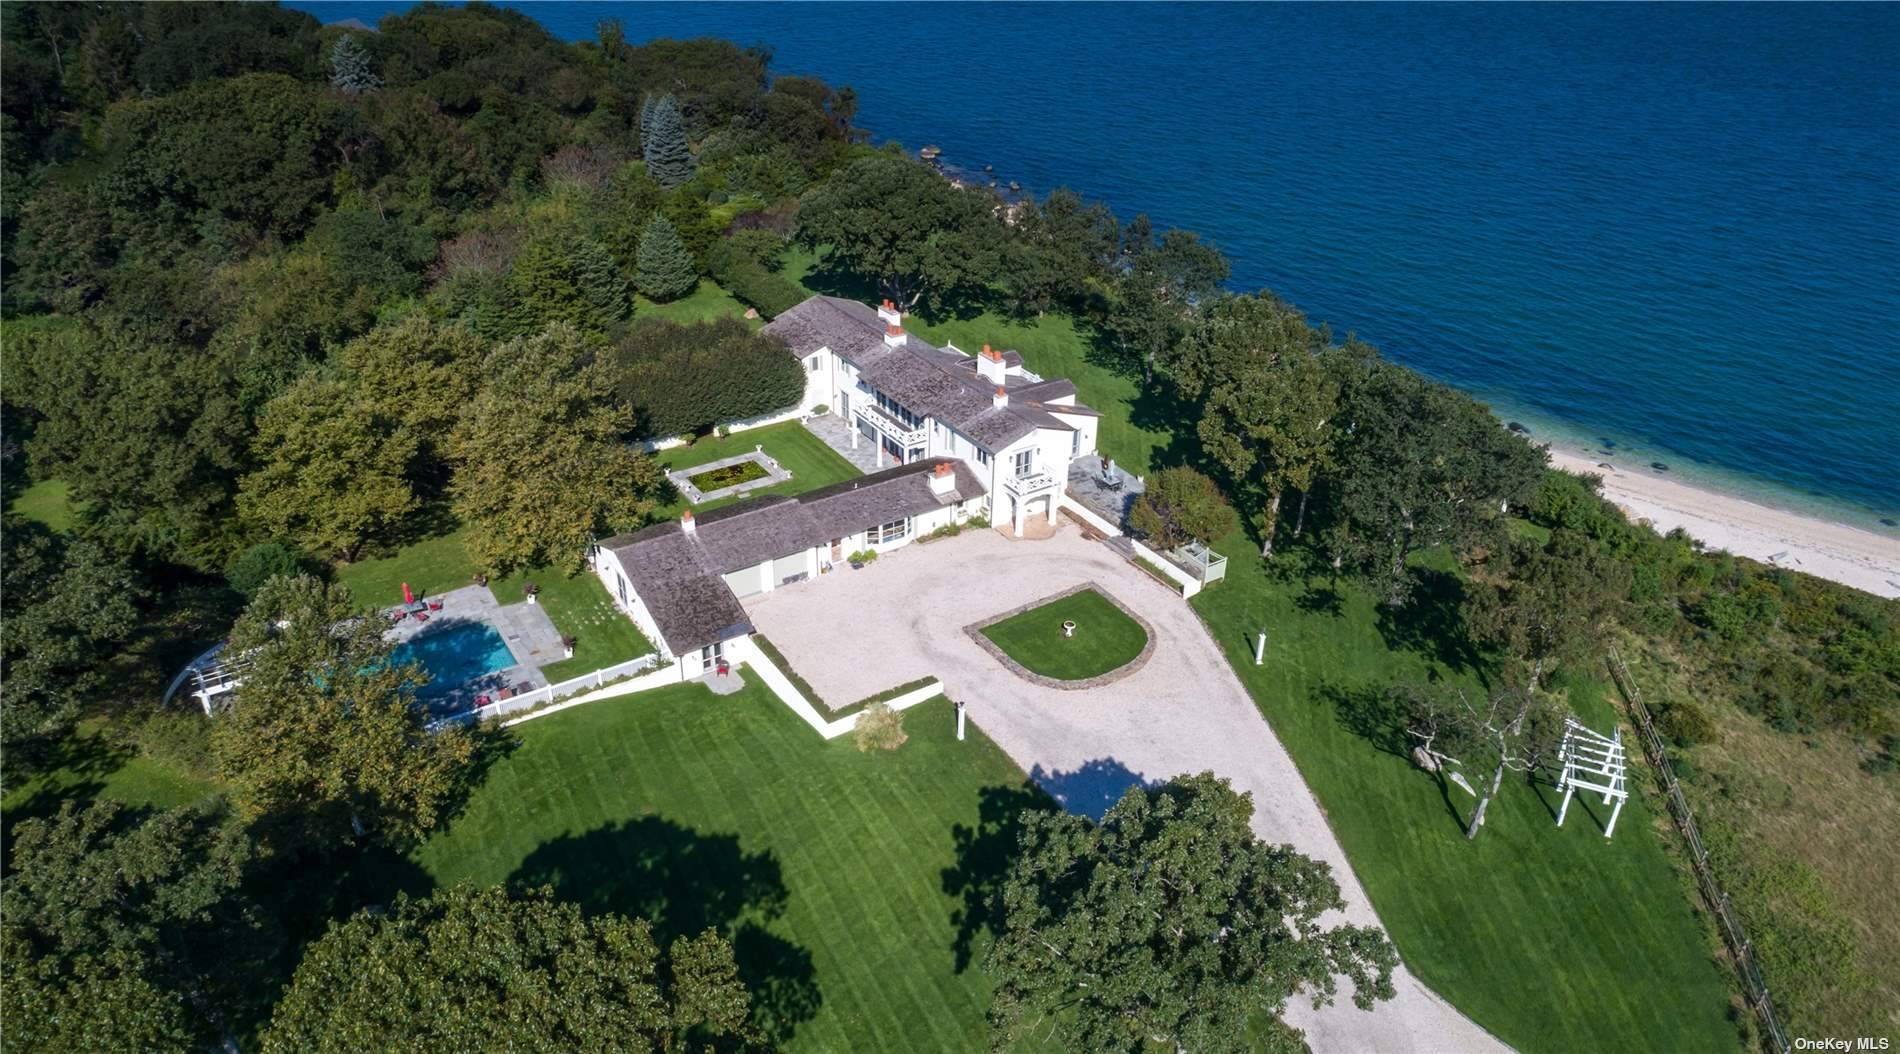 Down a private driveway with breathtaking views of the sea, privacy and luxury collide !